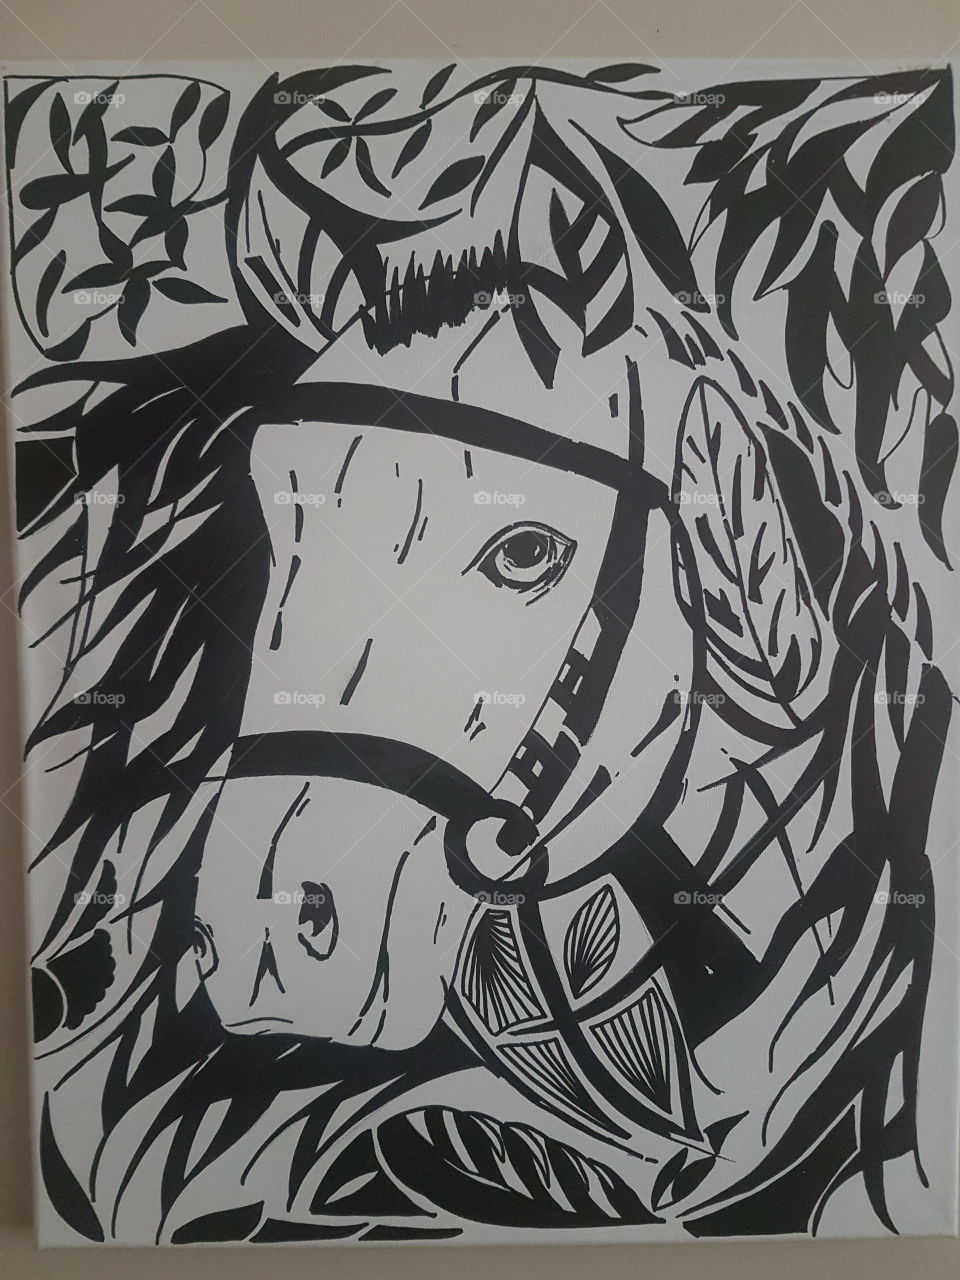 Freestyle Art of Horse Face